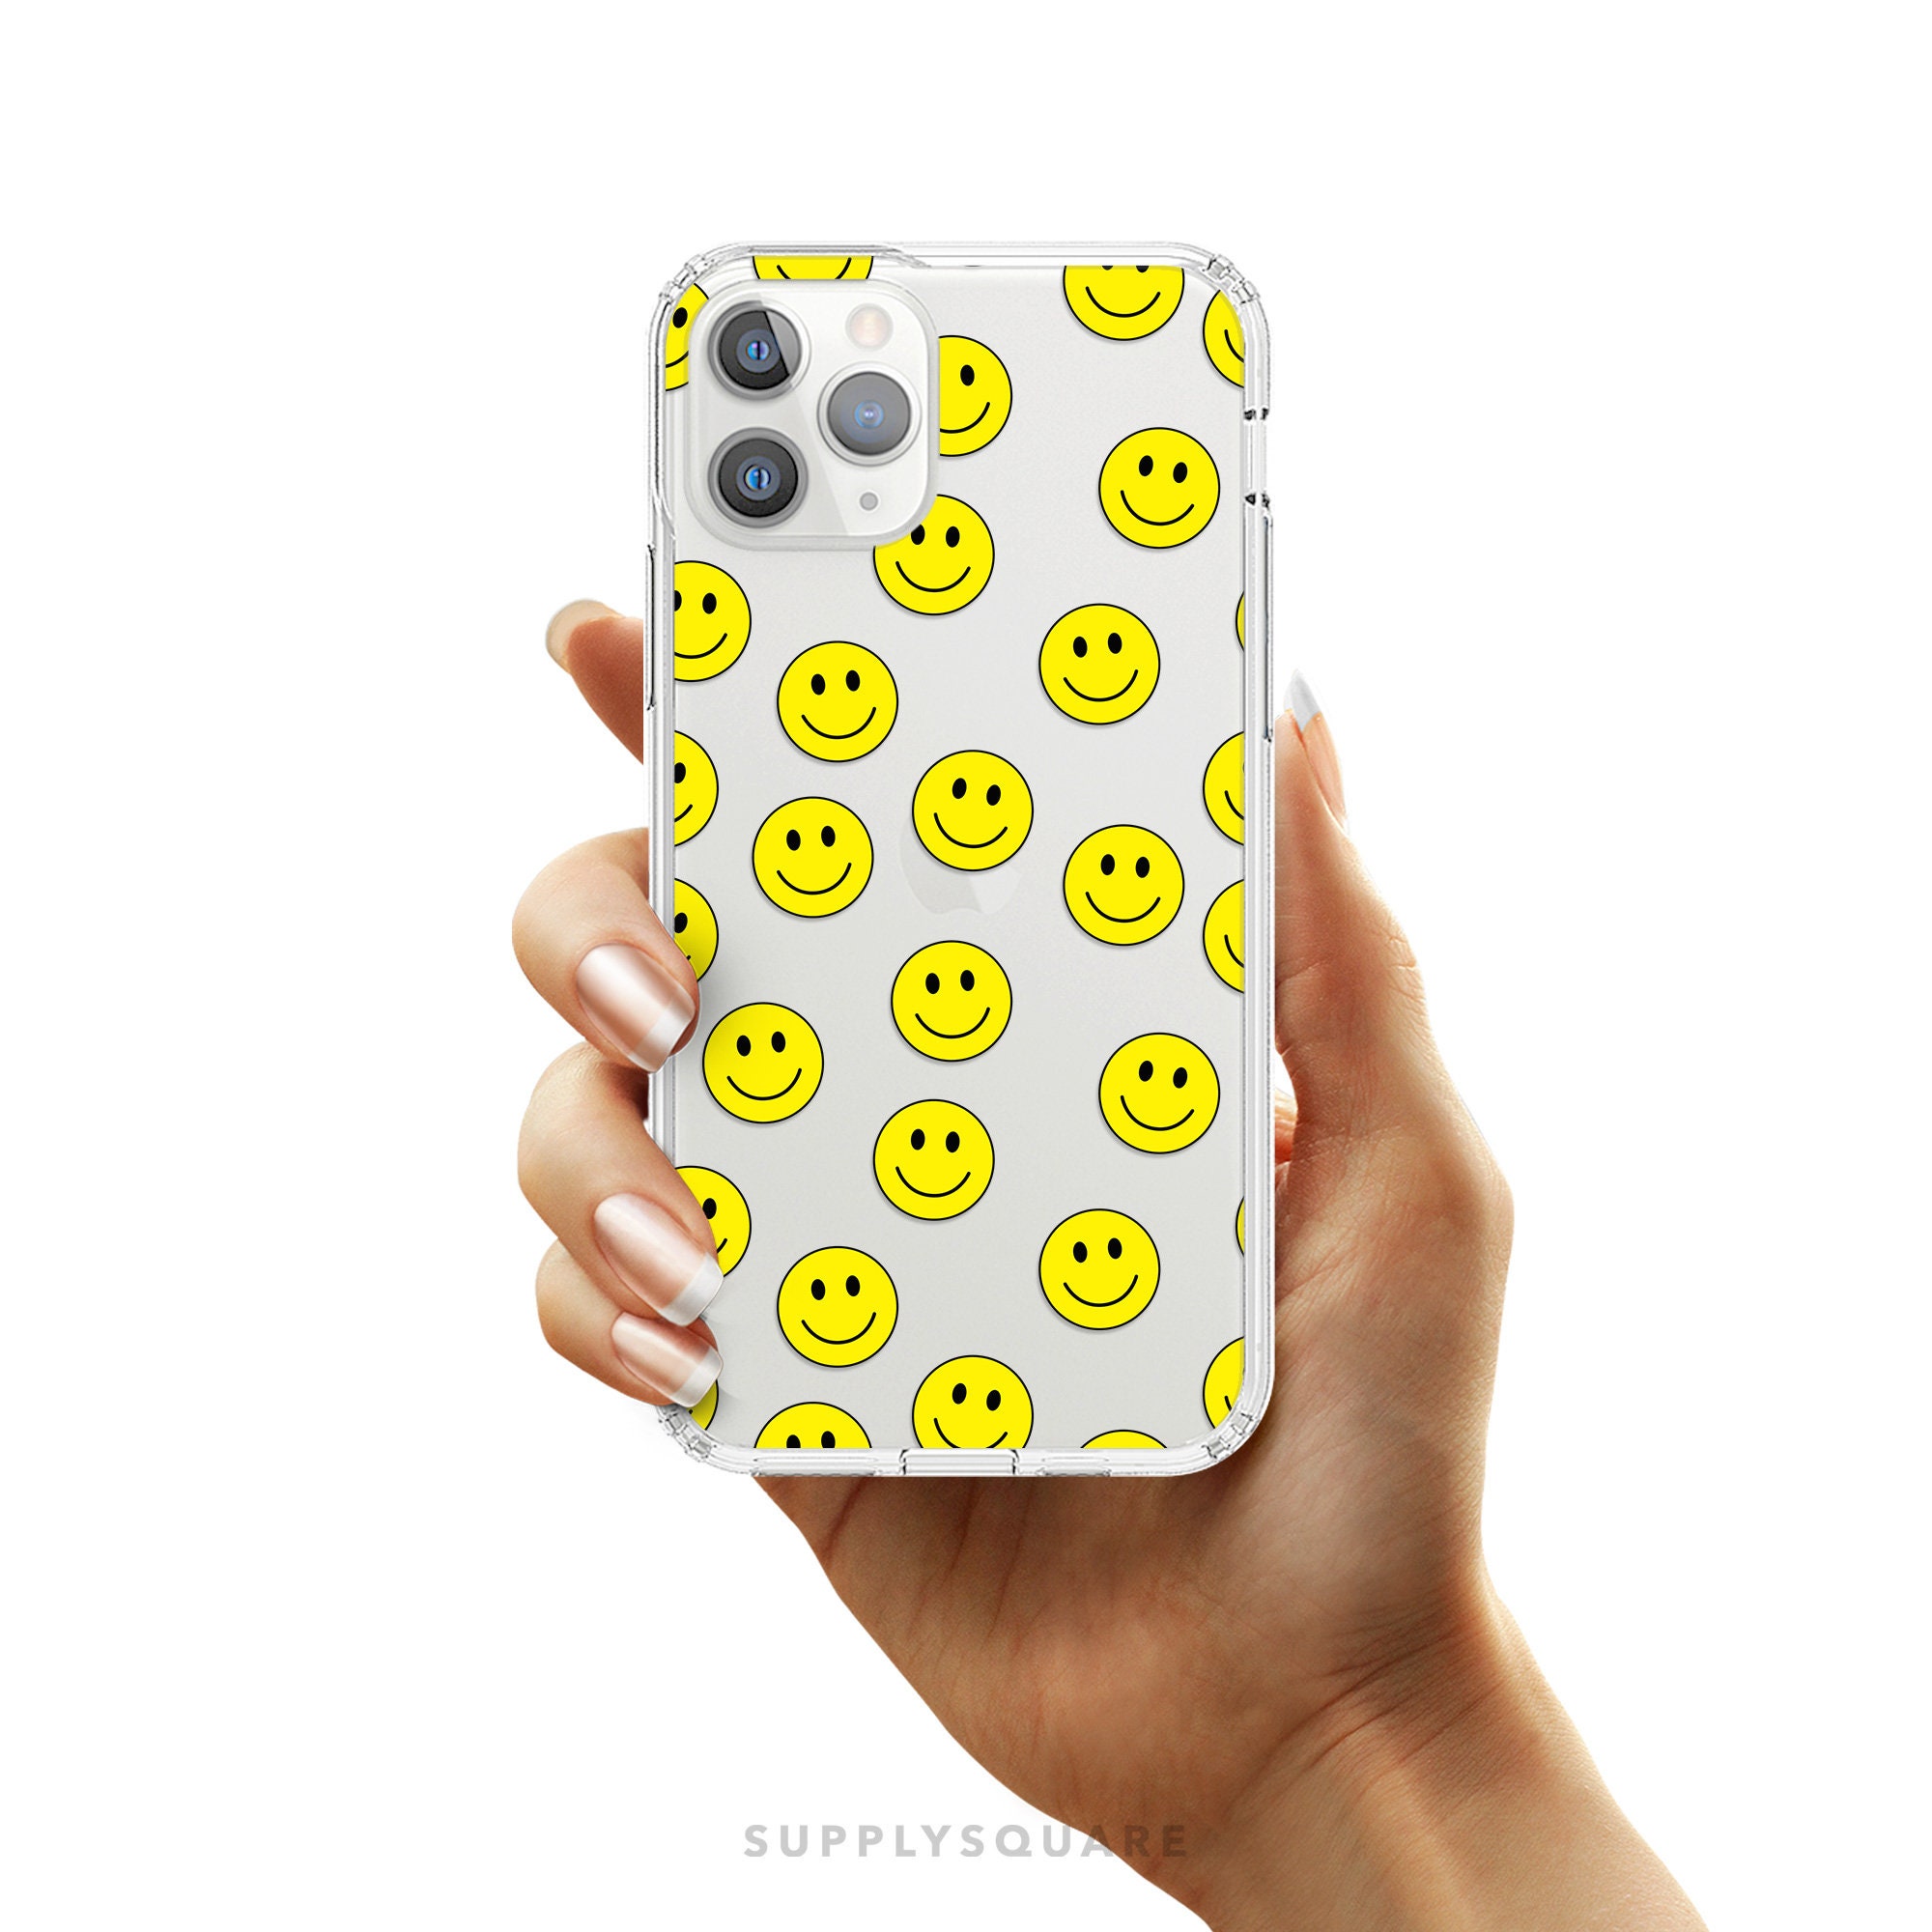 Clear Yellow Smiley Faces Iphone Case Iphone 11 Pro Max Etsy